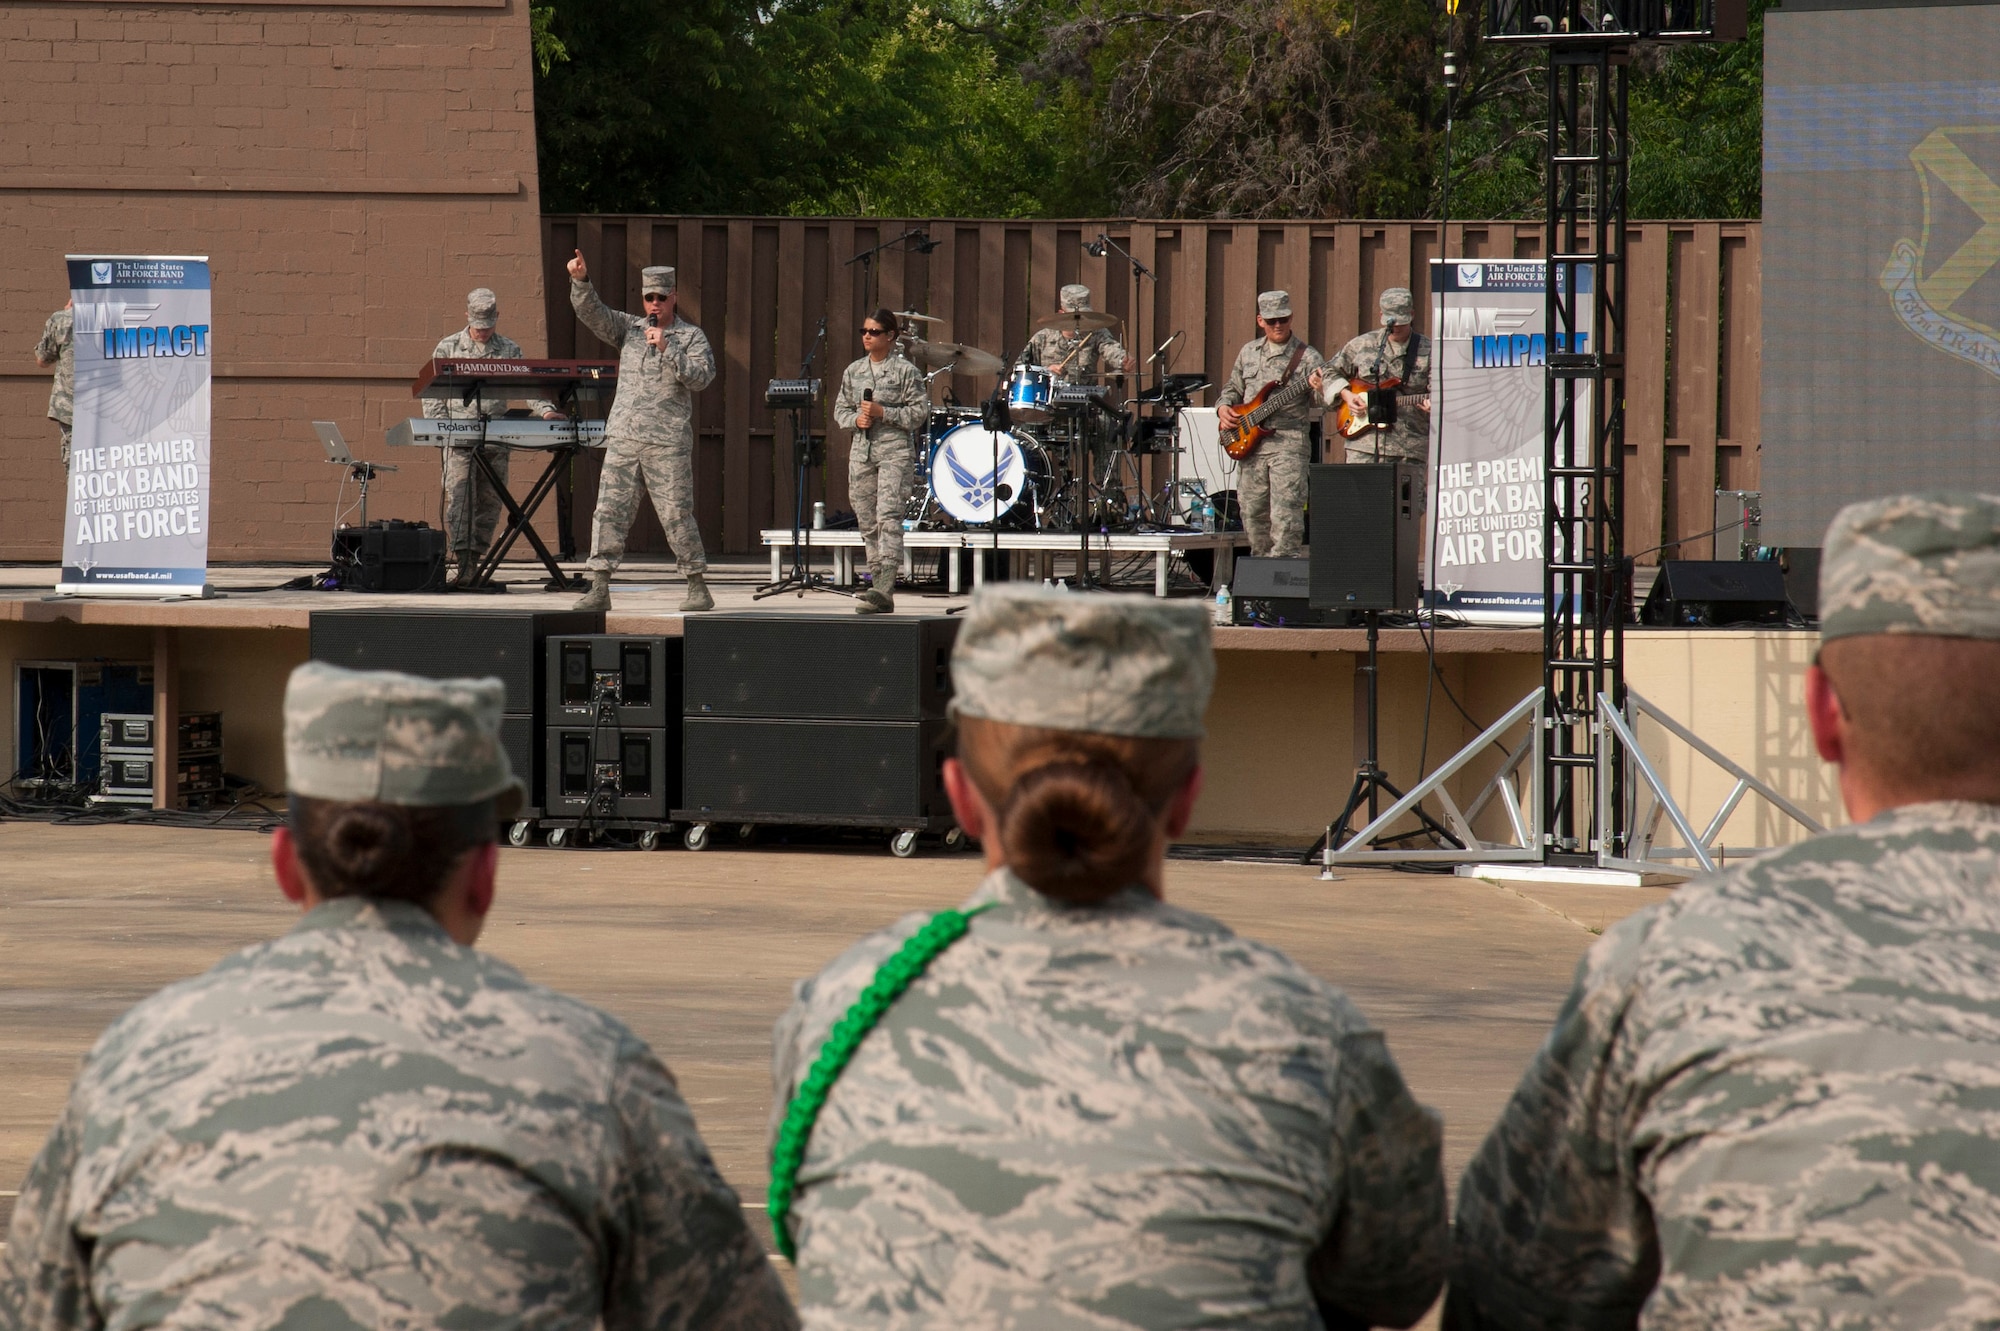 Senior Master Sgt. Ryan L. Carson, Superintendent and a vocalist, points into the crowd during a performance at the Air Force Basic Military Training Cadre's annual BBQ. The United States Air Force Band’s premier rock band, Max Impact and their debut of a song and video written especially for the 37th Training Wing Basic Military Training Cadre and support staffs. This was written as a recognition and thank you for their service and mission to, “Transform civilians into motivated, disciplined warrior Airmen with the foundation to serve in the world’s greatest Air Force.” The debut took place at Joint Base San Antonio – Lackland, Saturday April 29, 2017. (U.S. Air Force photo by Staff Sgt. Daniel Owen)